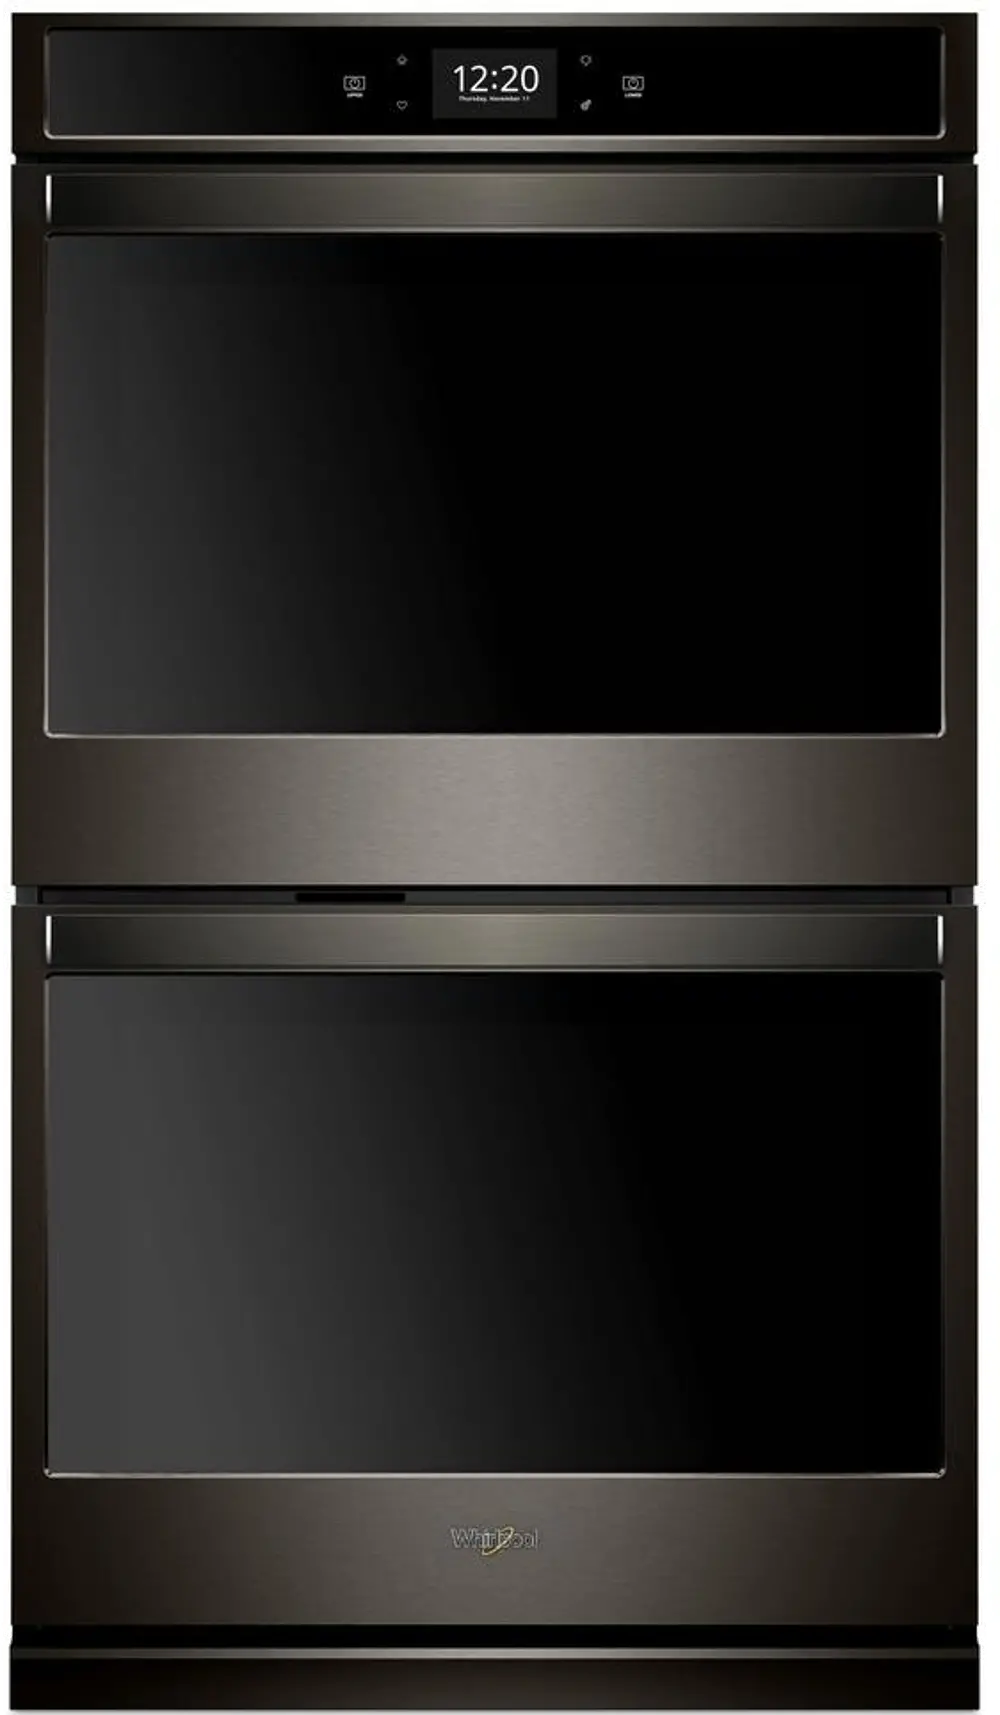 WOD77EC7HV Whirlpool 27 Inch Smart Double Wall Oven with Convection - 8.6 cu. ft. Black Stainless Steel-1